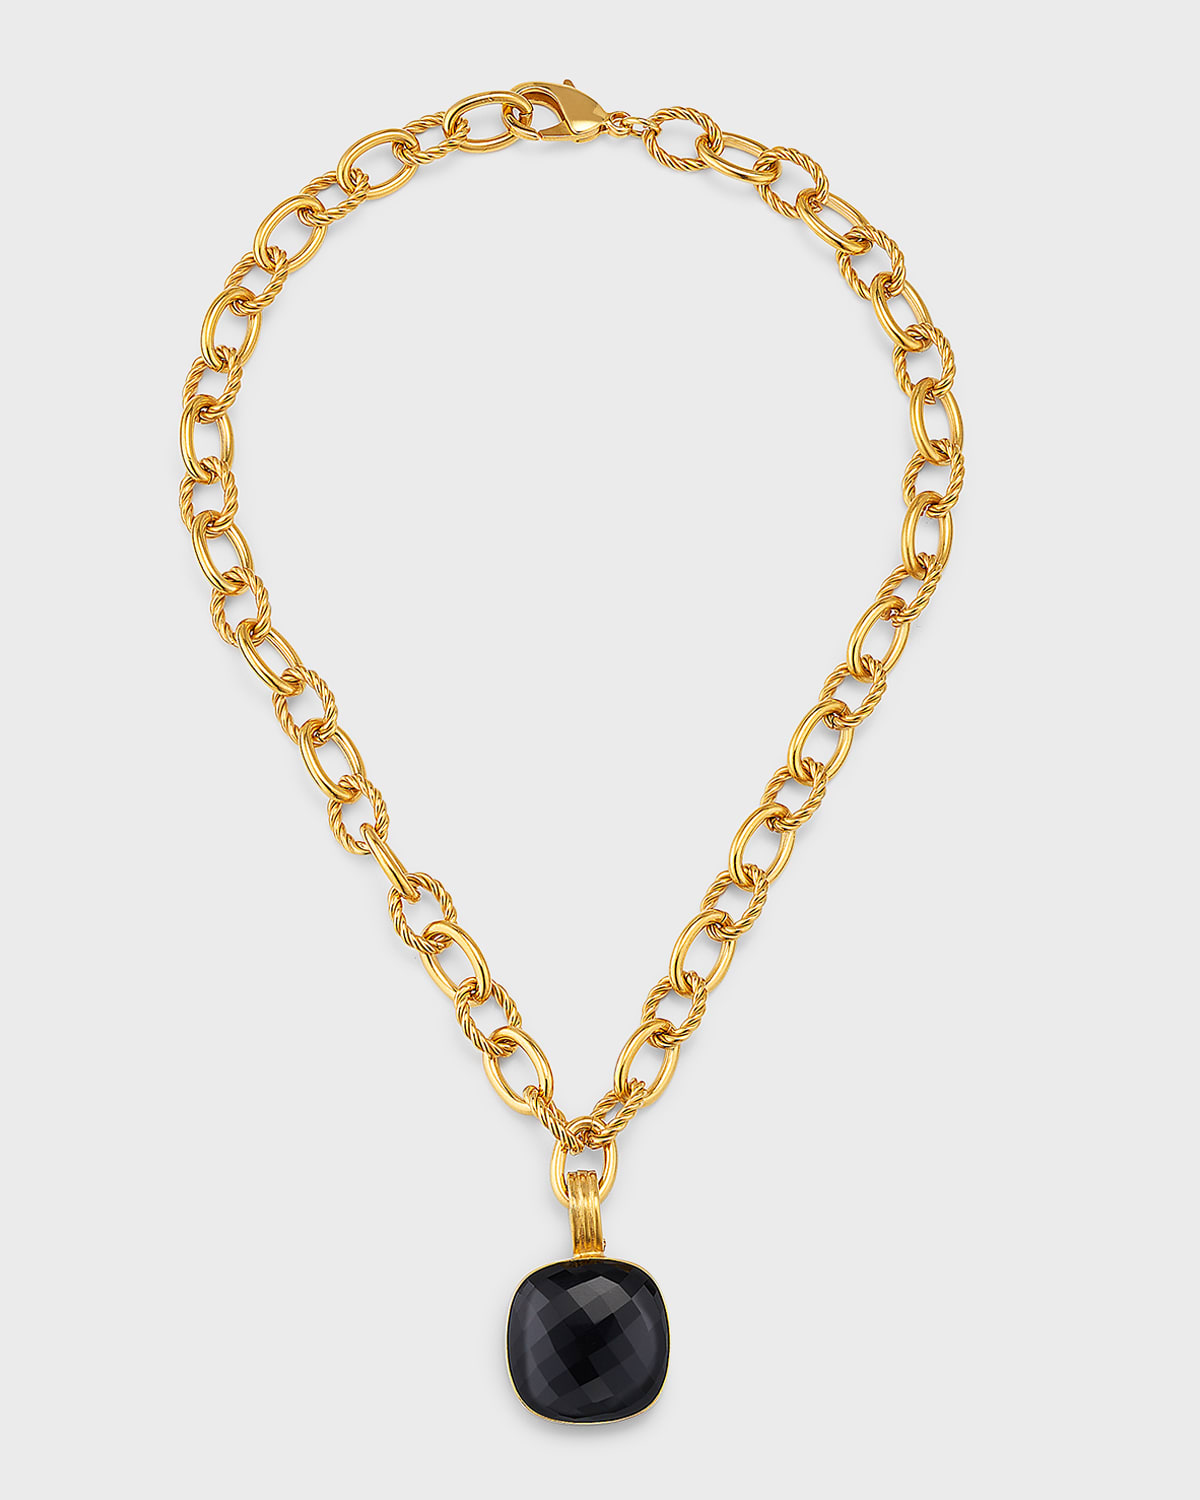 Black Onyx Lily Chain Necklace